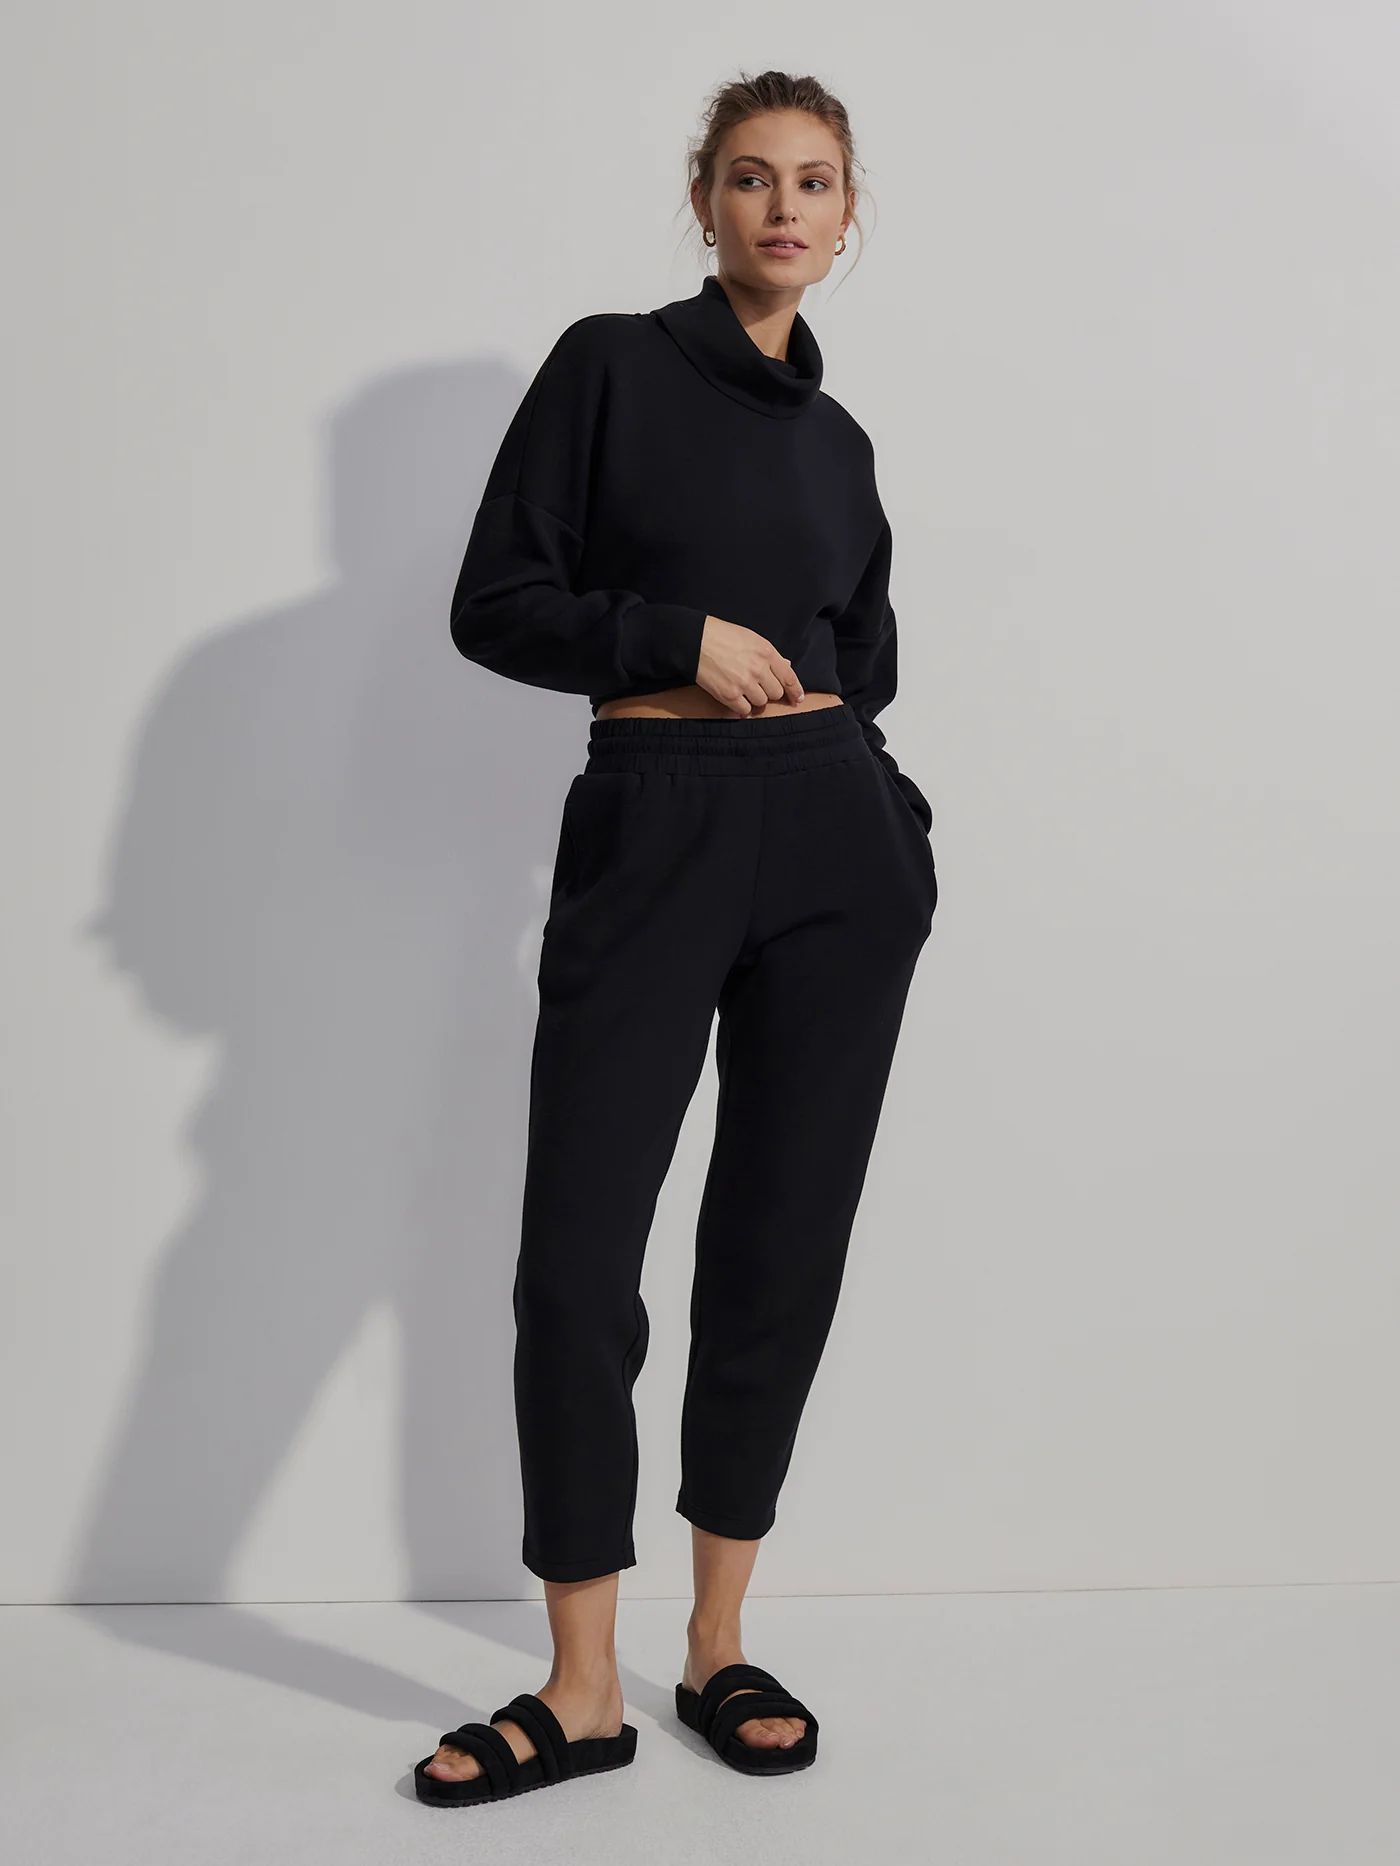 The Slim Pant 254 ReviewsVersatile and easy to style, the Slim Pant 25 is a high-waisted, cigaret... | Varley USA